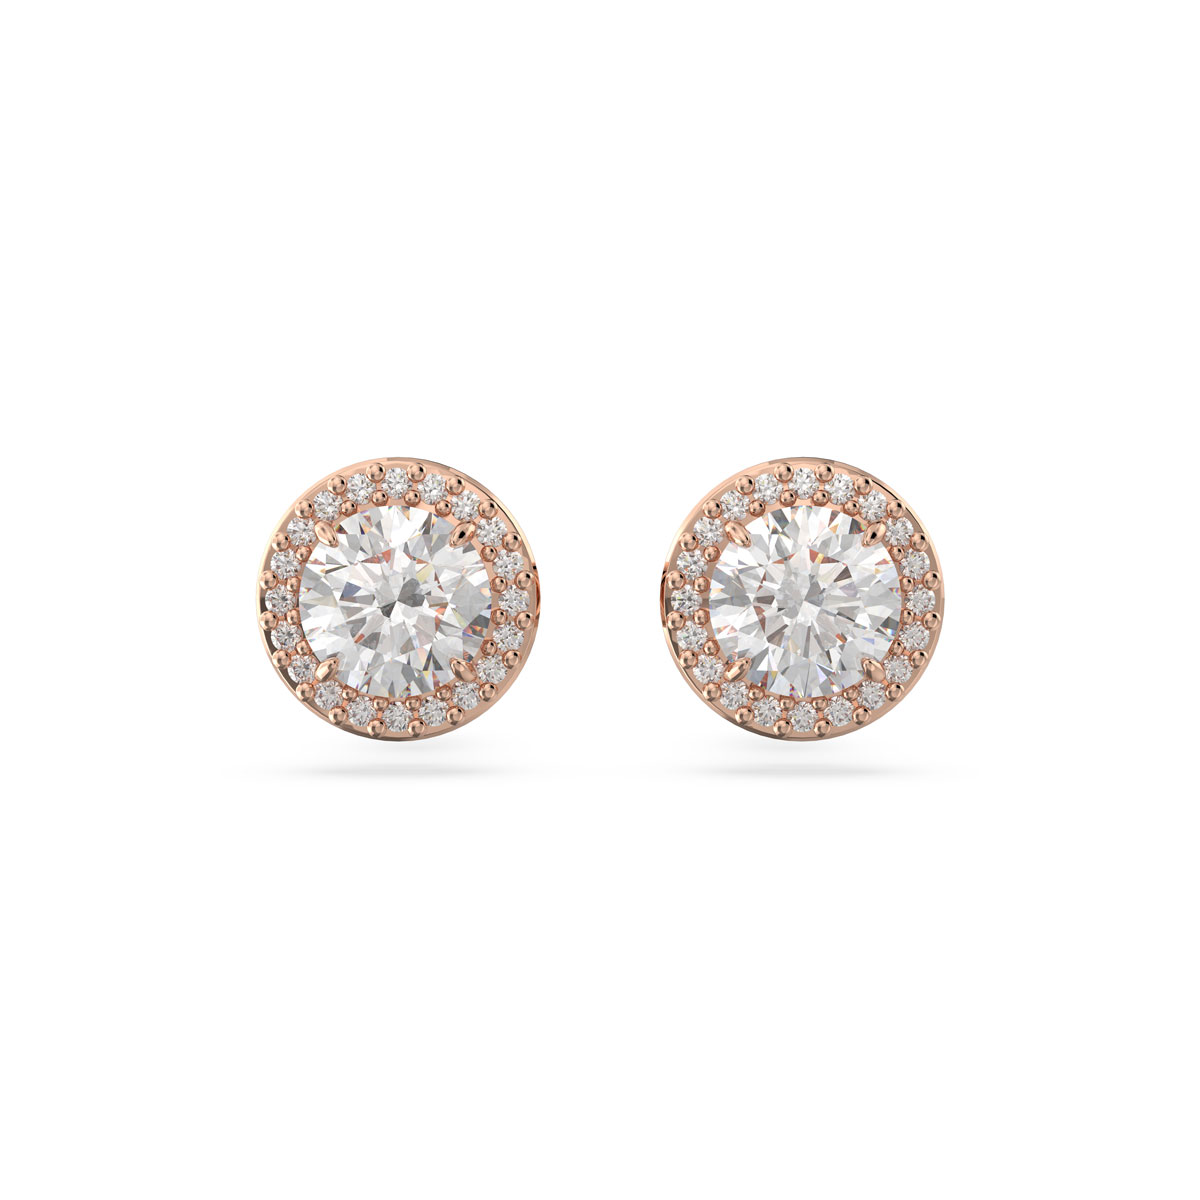 Swarovski Constella Stud Earrings, Round Cut, Pave, White, Rose Gold Tone Plated